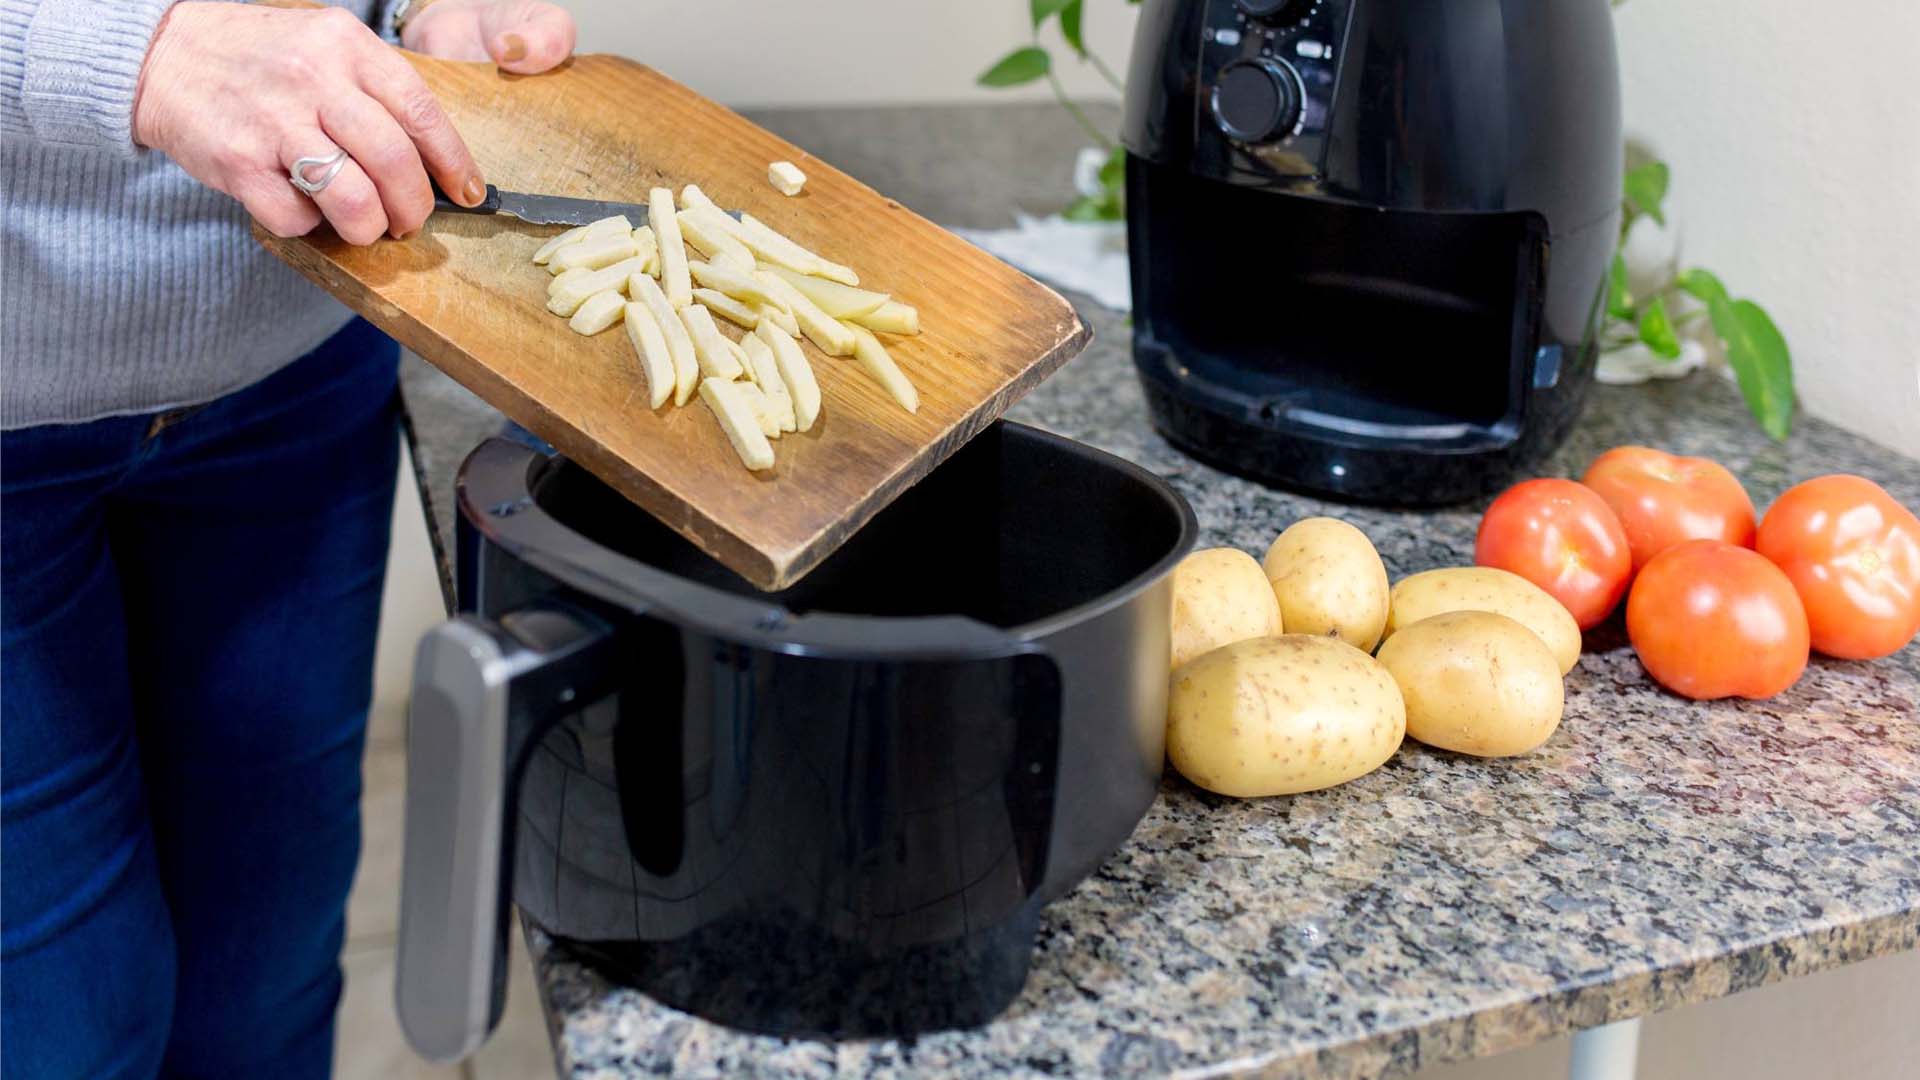 A person putting chopped potatoes into an air fryer